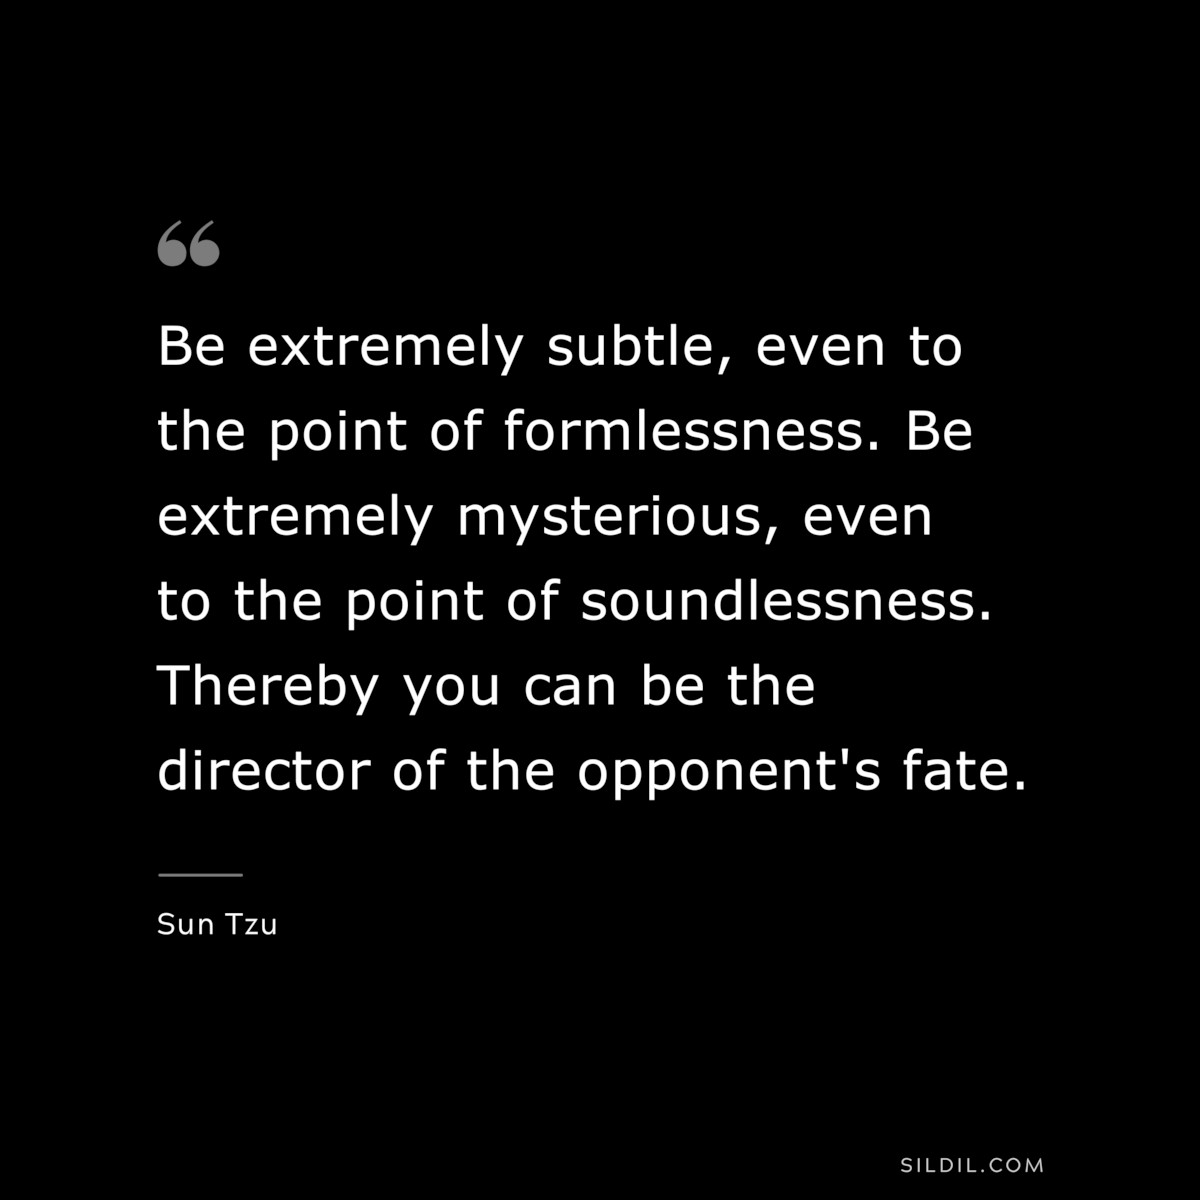 Be extremely subtle, even to the point of formlessness. Be extremely mysterious, even to the point of soundlessness. Thereby you can be the director of the opponent's fate.― Sun Tzu